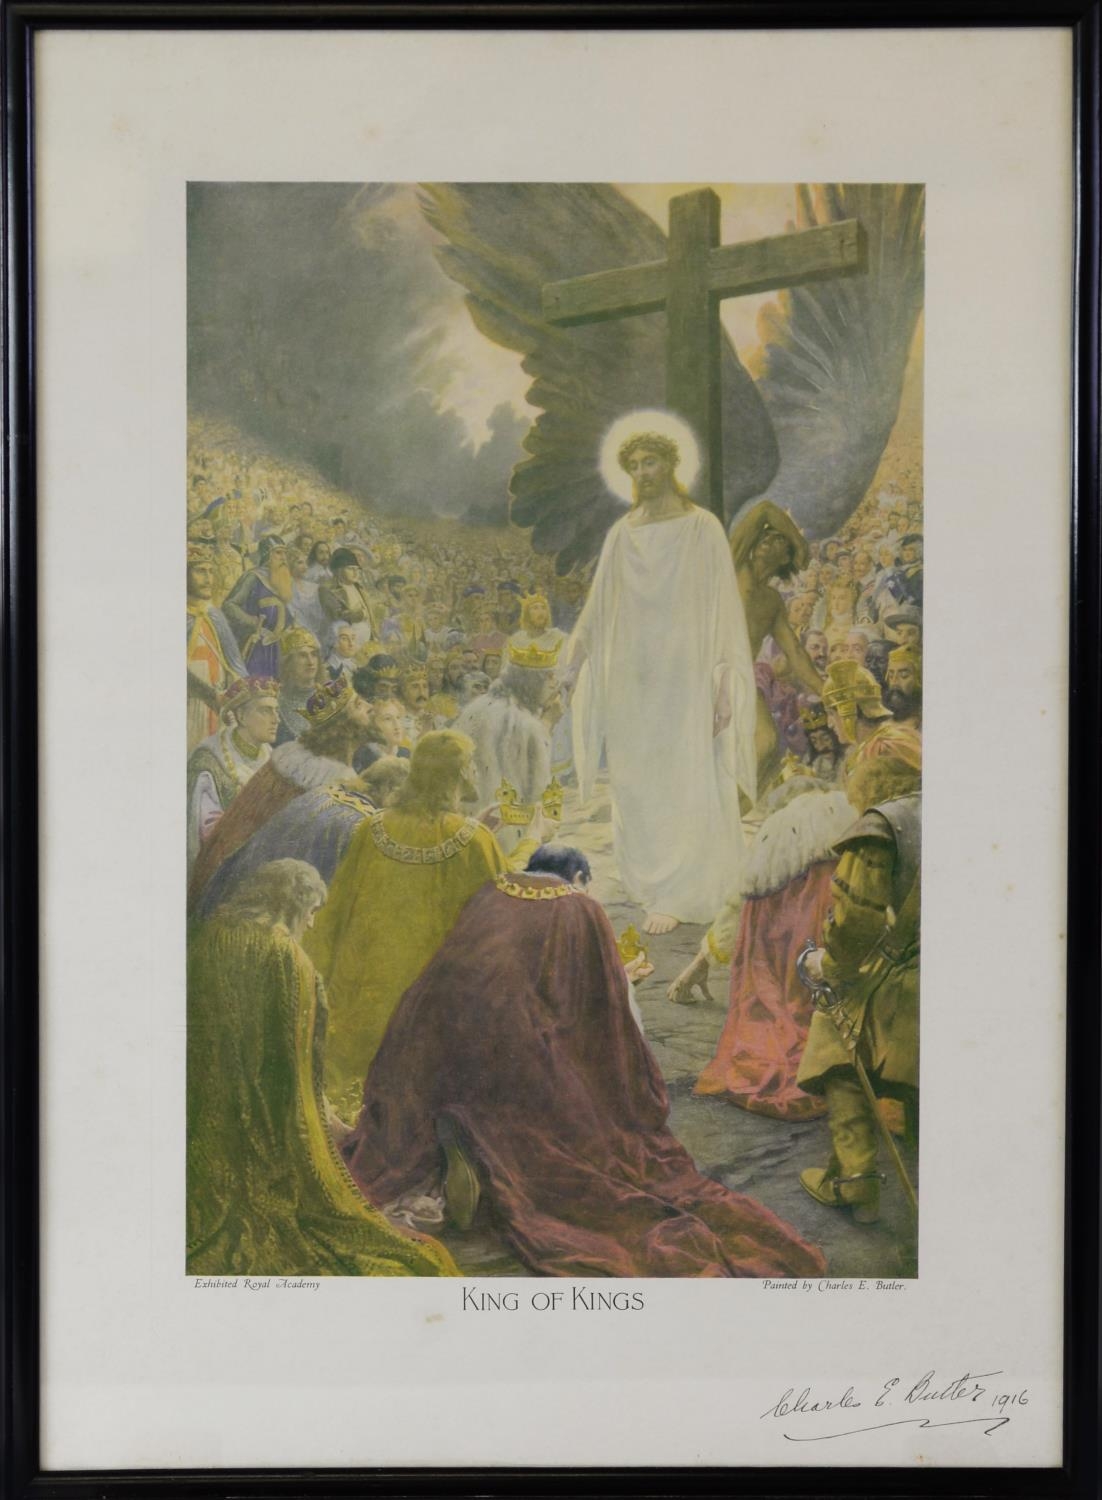 CHARLES E. BUTLER (1888-1957) ARTIST SIGNED COLOUR PRINT ‘King of Kings’ Signed and dated 1916, - Image 2 of 2